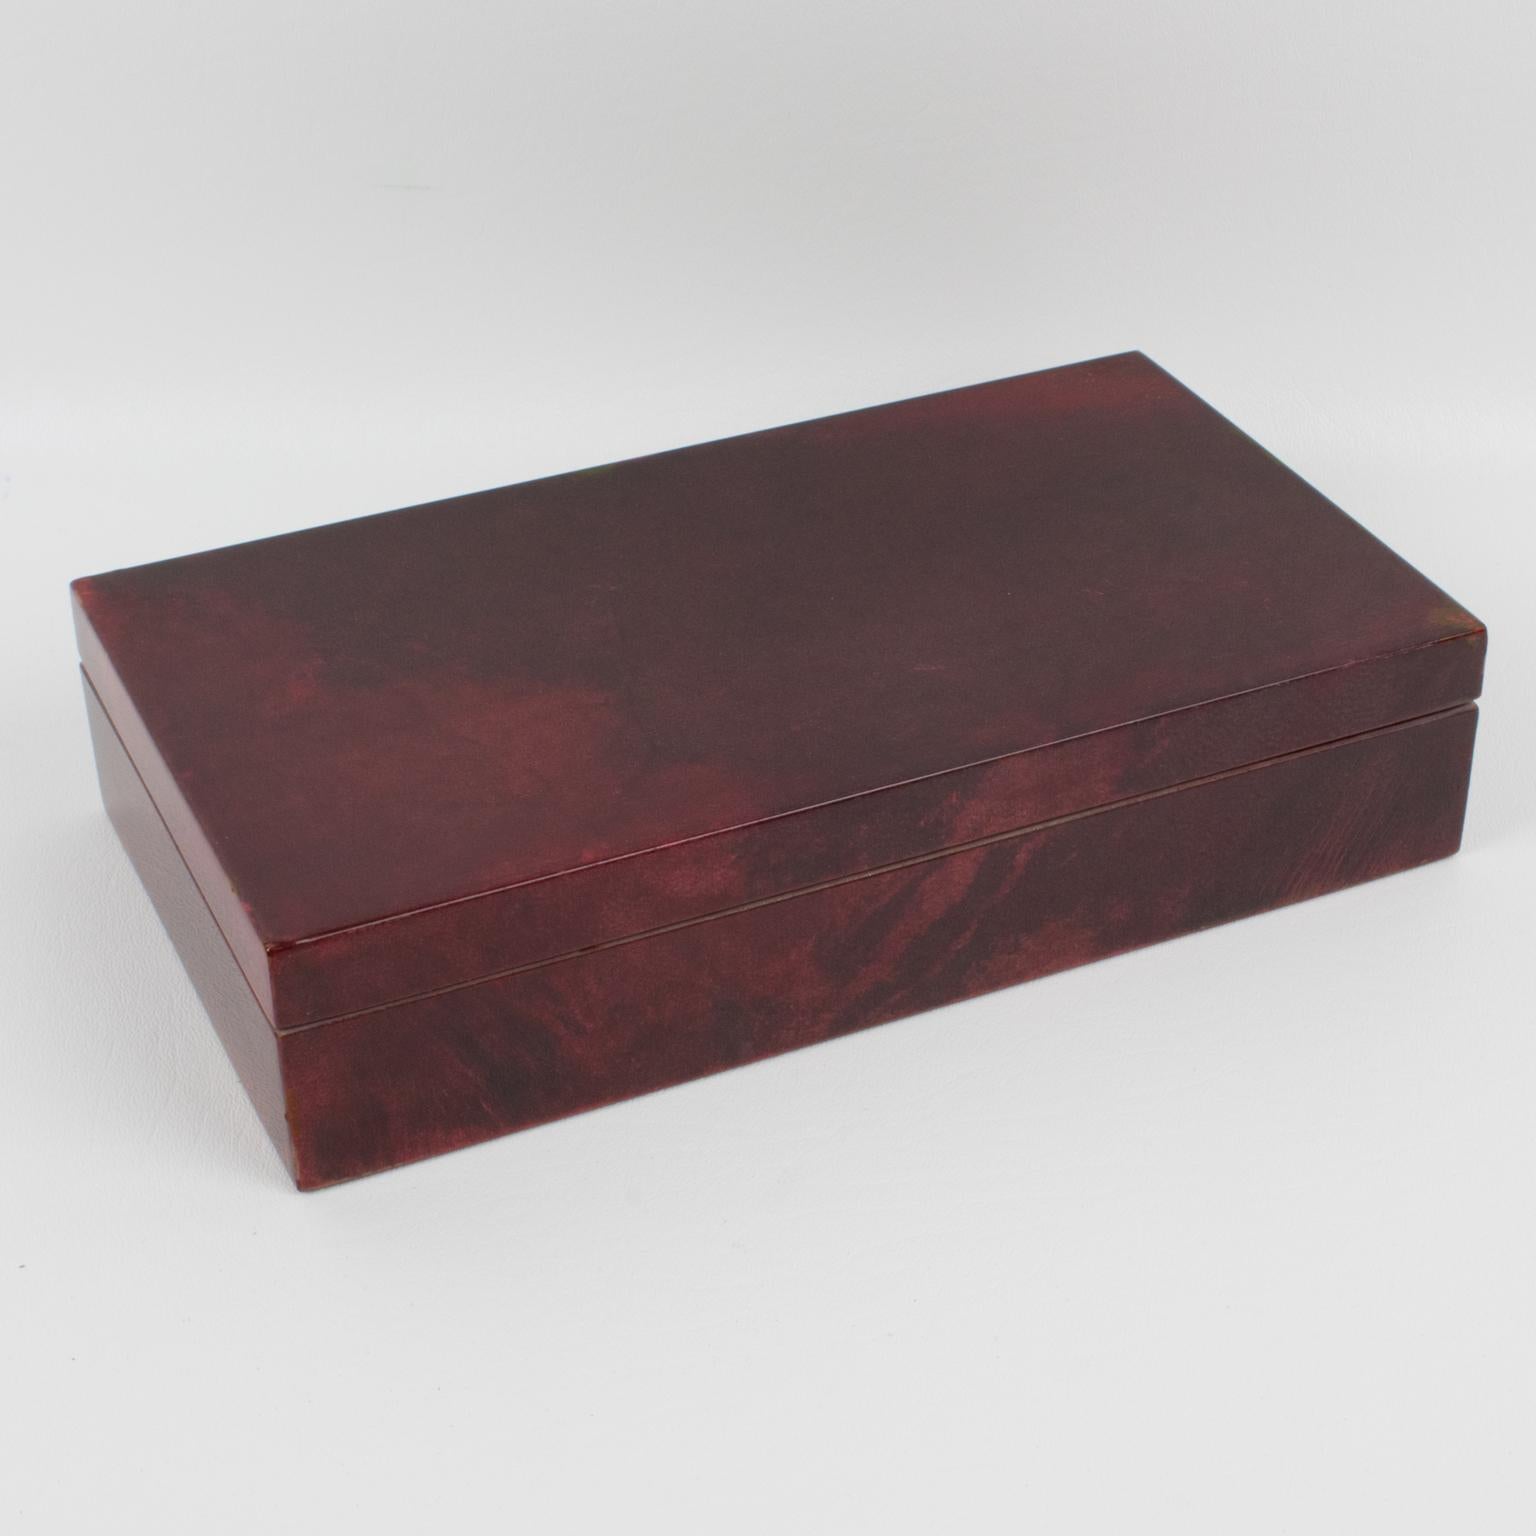 Refined lacquered goatskin decorative lidded box by Italian designer Aldo Tura, Milano. A 1970s rectangular wooden box with lacquered oxblood colored goatskin parchment veneer. Interior in high gloss lacquered wood. The original Aldo Tura label